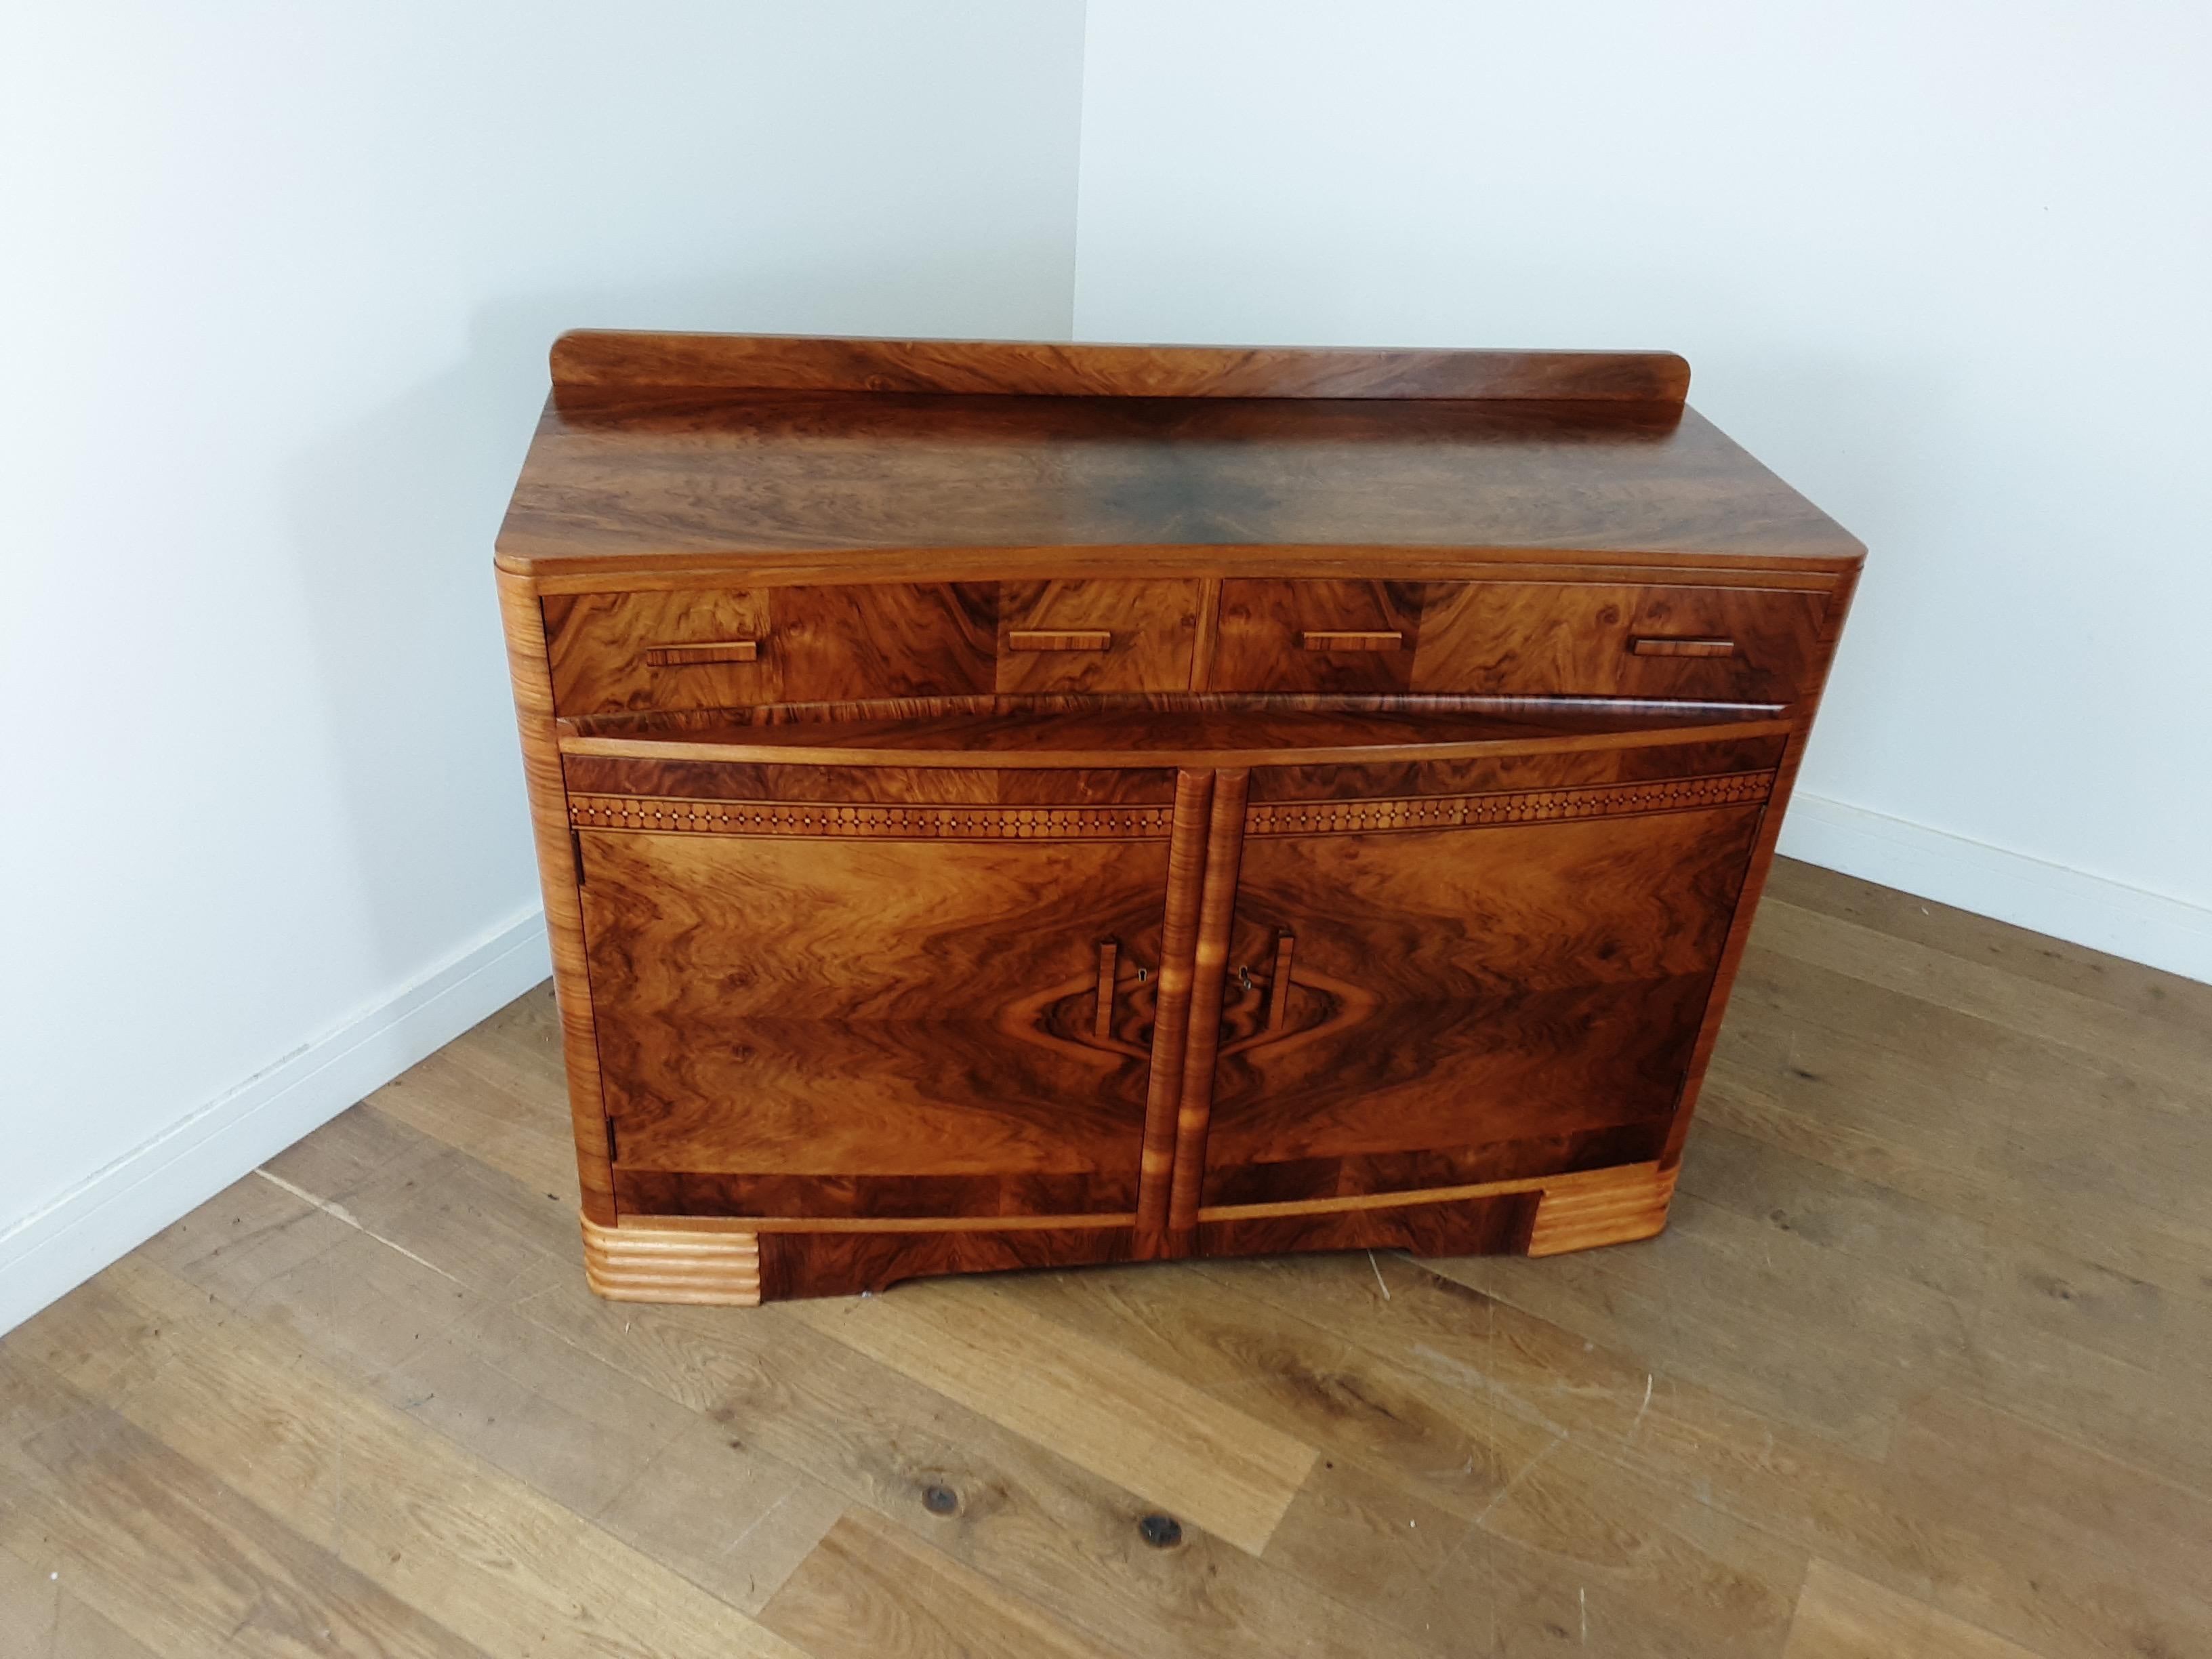 Art Deco sideboard.
Utterly beautiful, this sideboard has a stunning figured walnut with a beautiful marquetry band, the two drawers sweep in to meet giving a curved ledge, the edges are all rounded off, contrasting veneer to the base showing